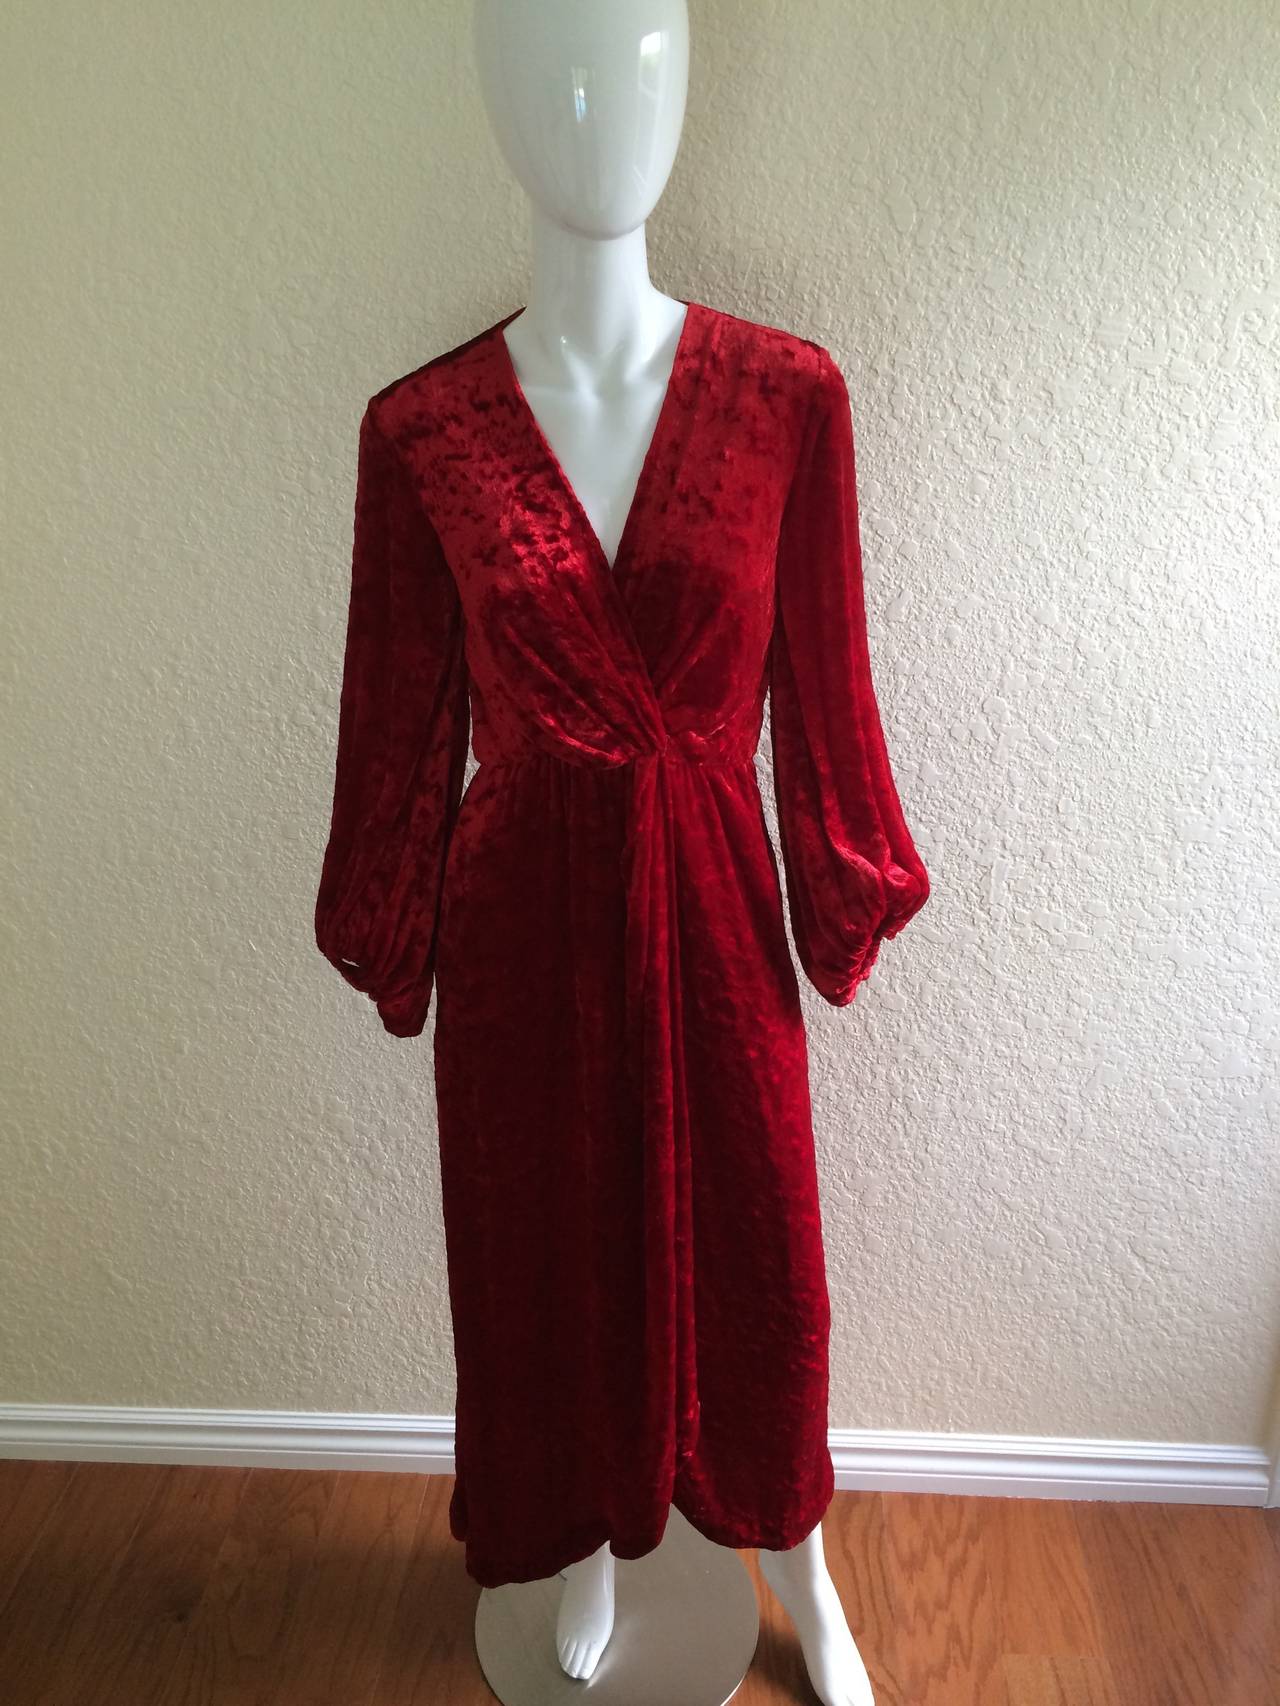 Stunning Saint Laurent Red Hostess gown or dress by Yves saint Laurent.
The fabric is a red crushed velvet, with gorgeous  drape. The front closes by crossing over and is secured by interior clasps. The sleeves are full and billowy with elastic at